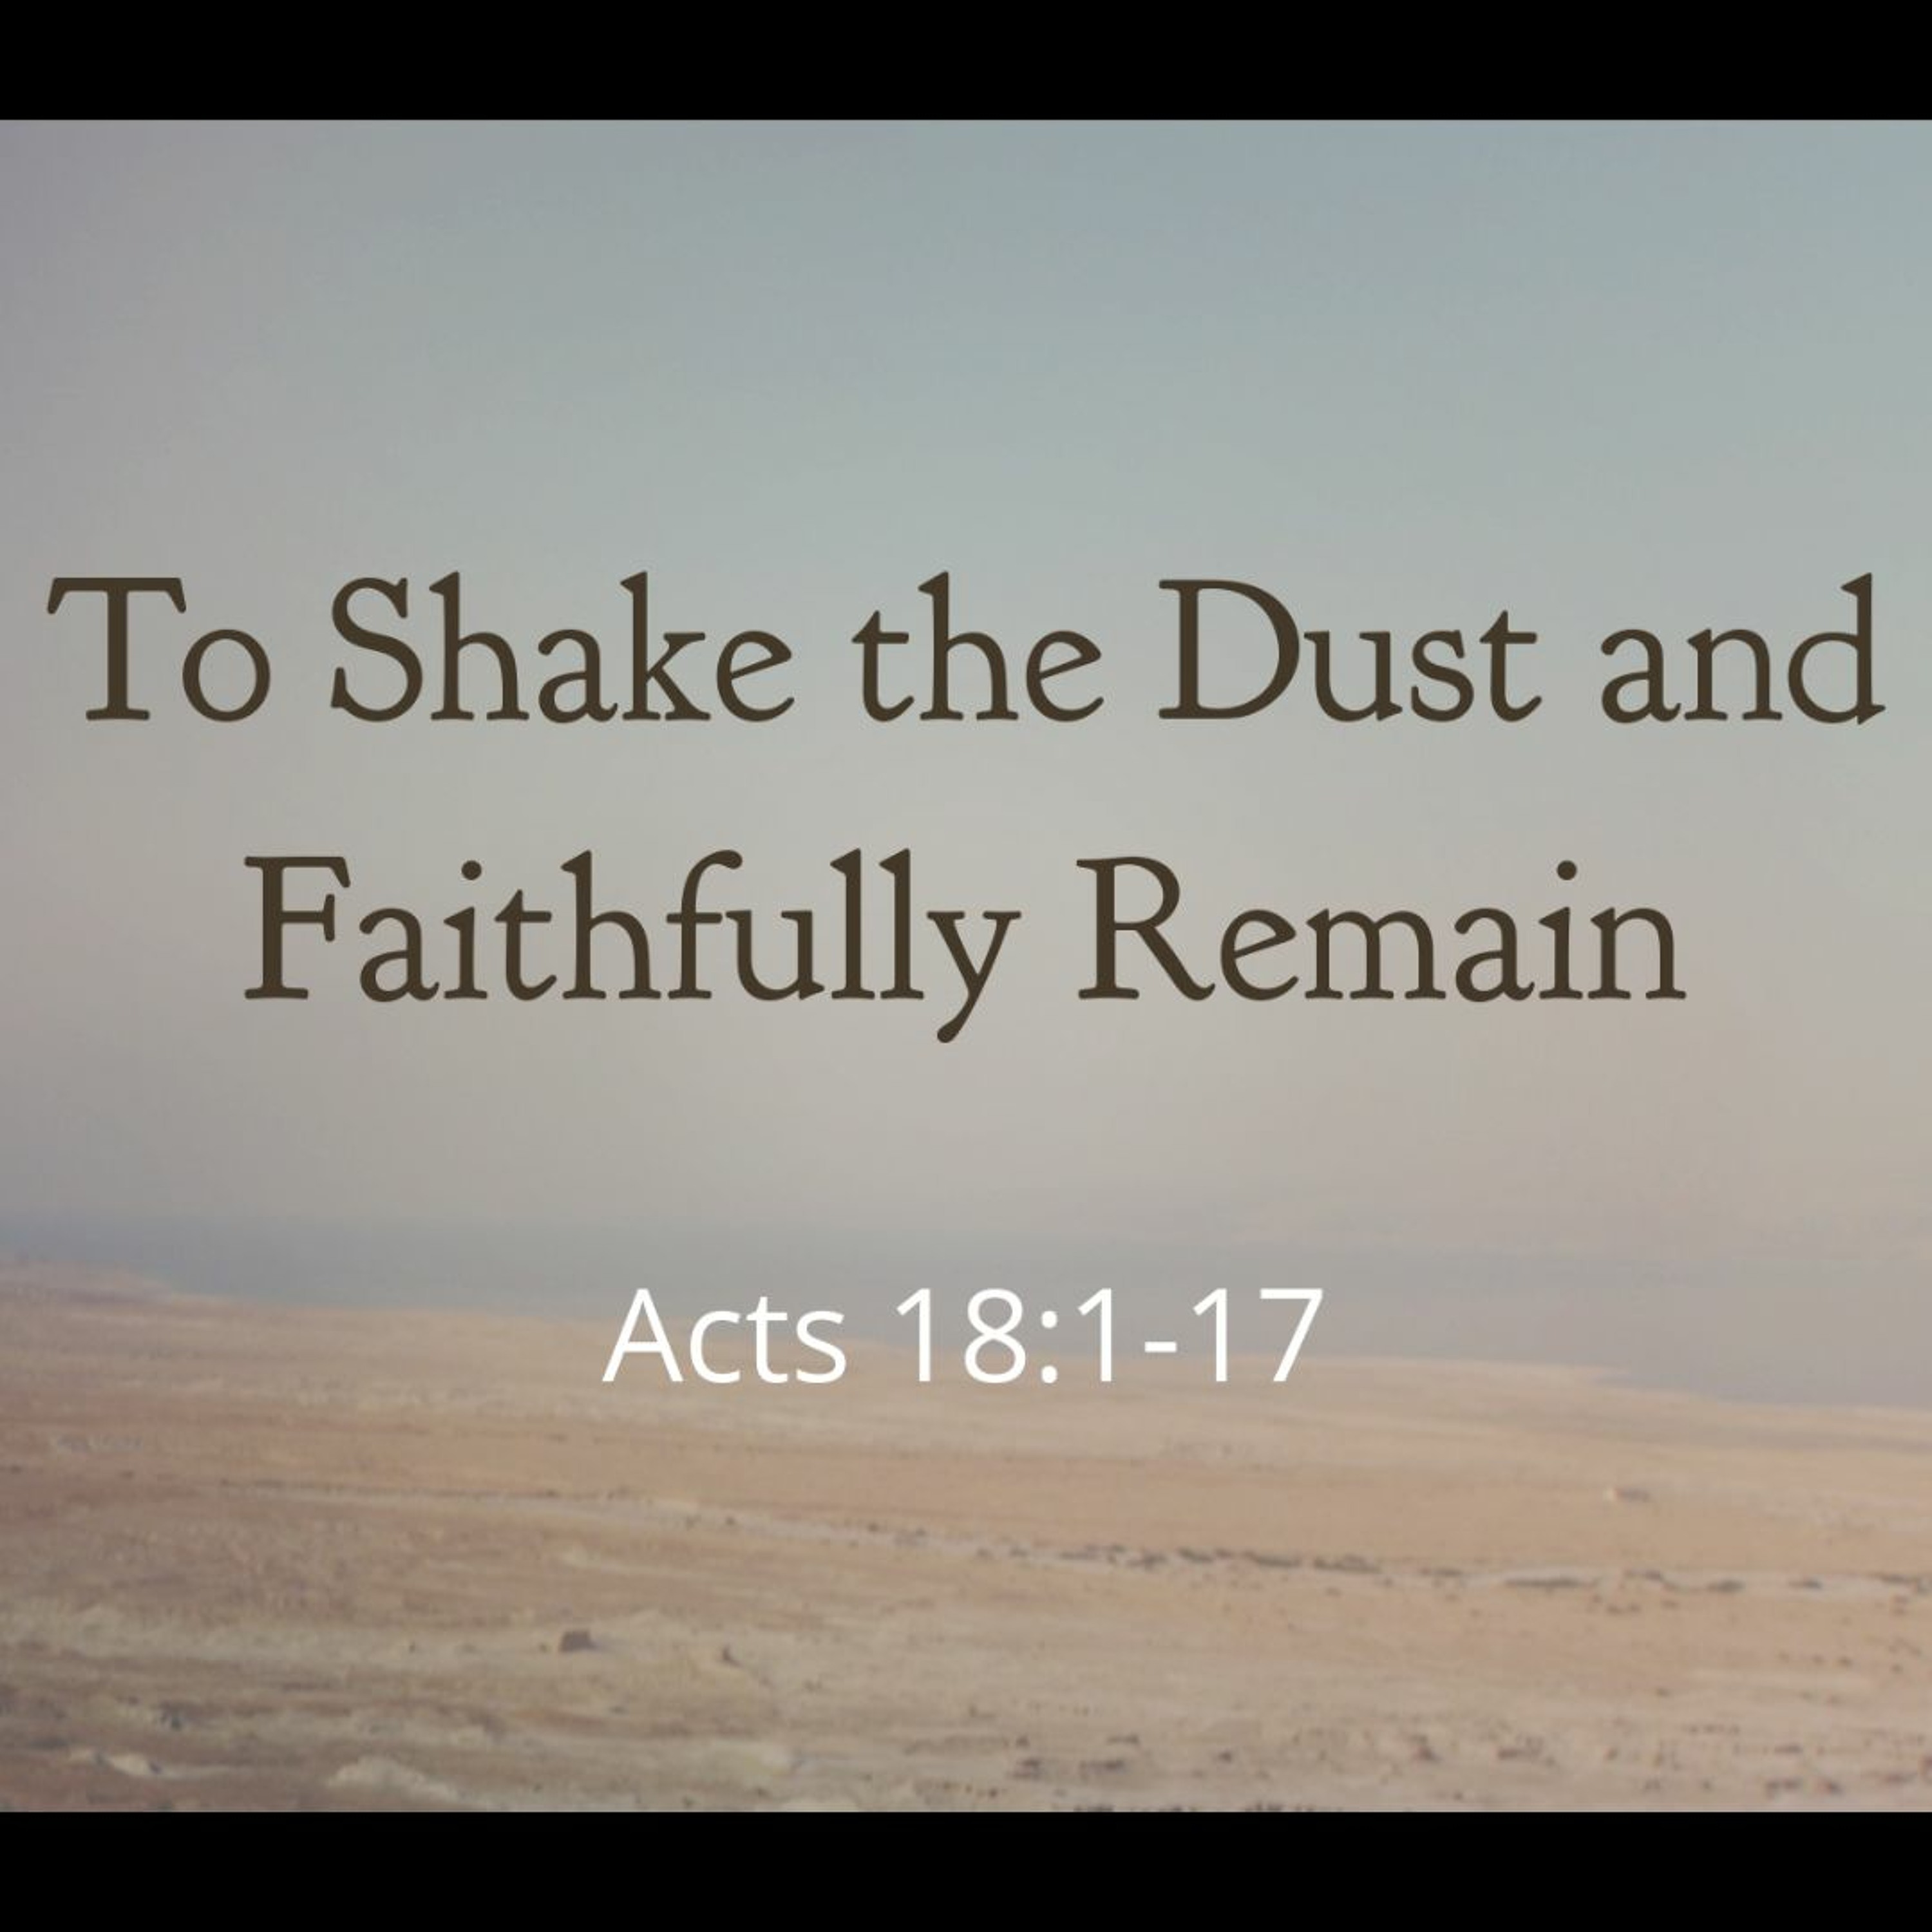 To Shake the Dust and Faithful Remain (Acts 18:1-17)